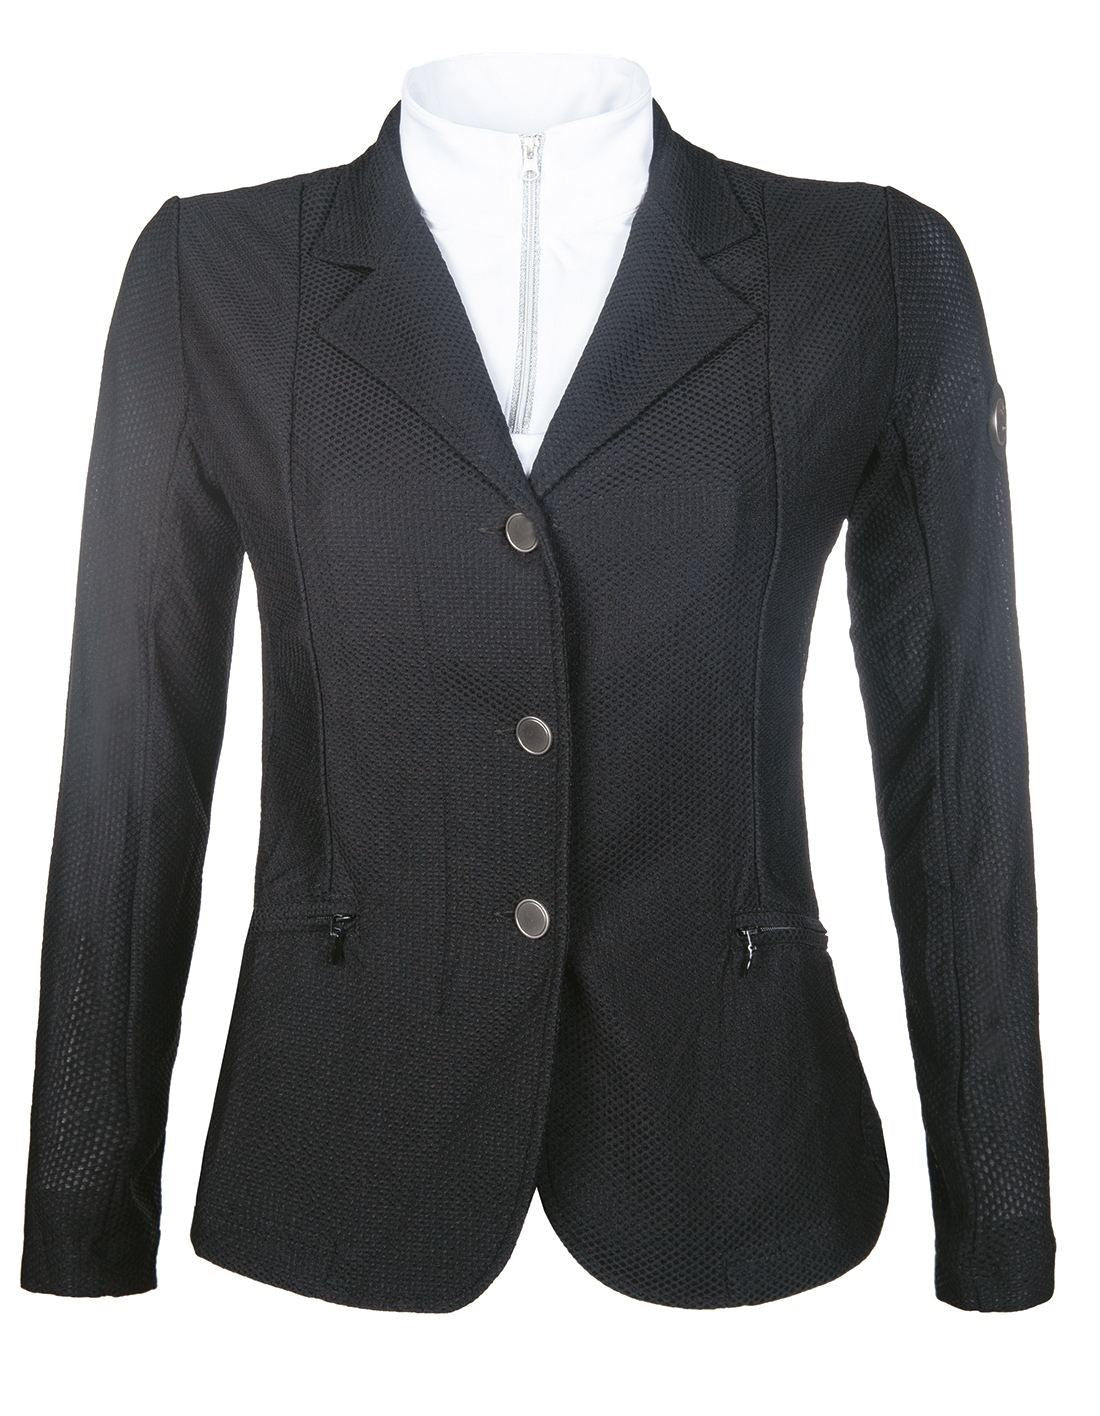 HKM Competition Jacket Mesh Women & Kids - Just Horse Riders